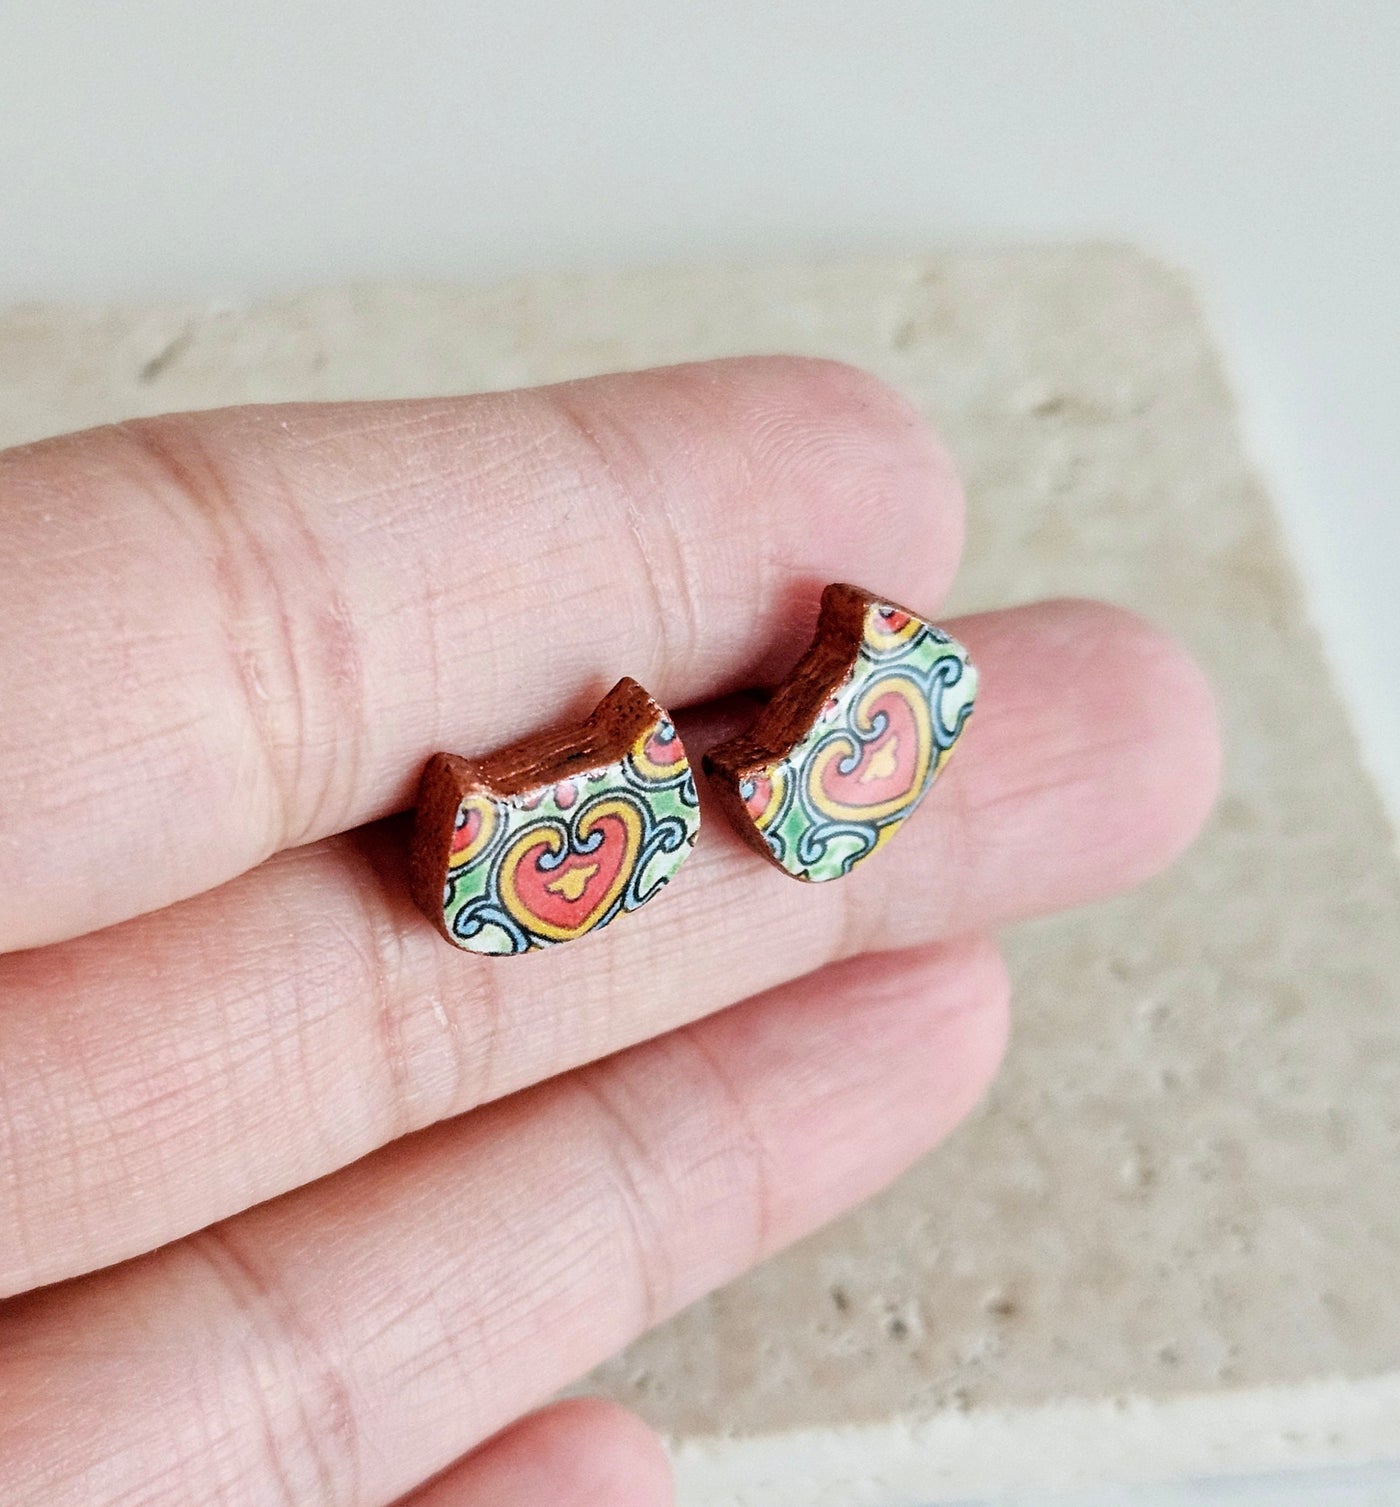 Mexican Tile Cat Earring Colorful Spanish Jewelry Talavera Tile Stud Cat Red Green Post Earring Cat Mom Gift Handmade Latina Birthday Gift